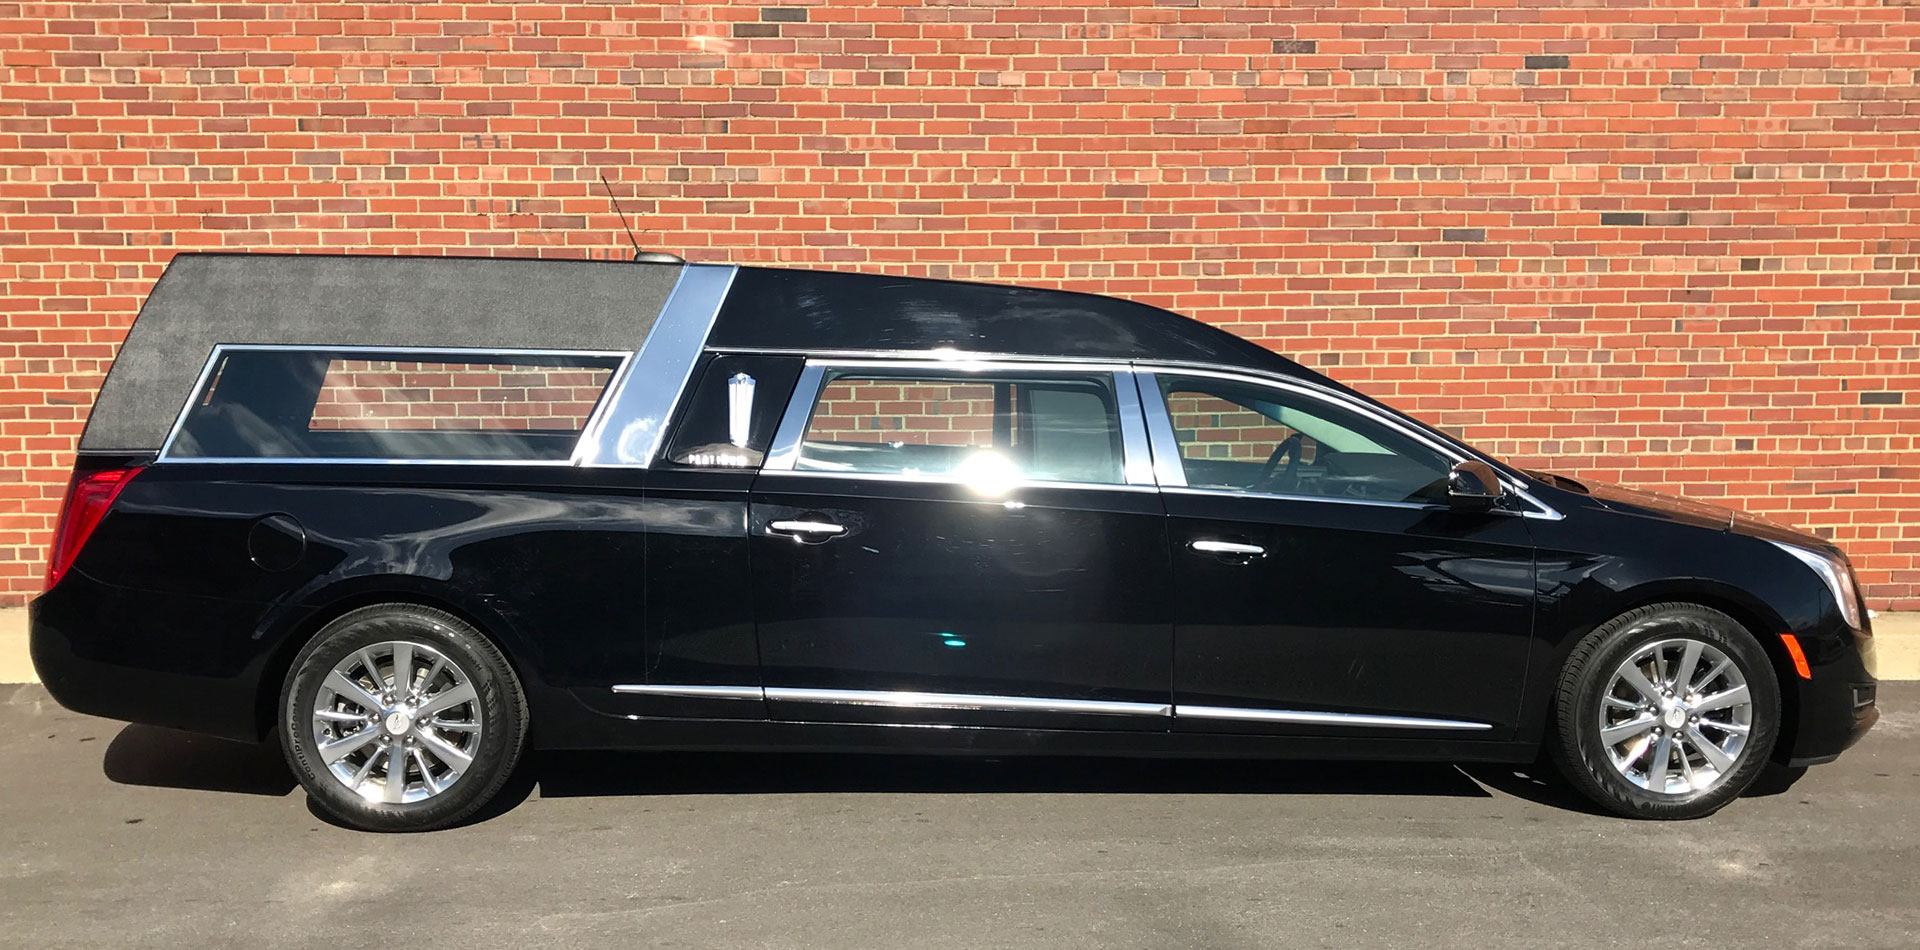 American Coach Sales - Cleveland and Columbus - Hearses and Limousines